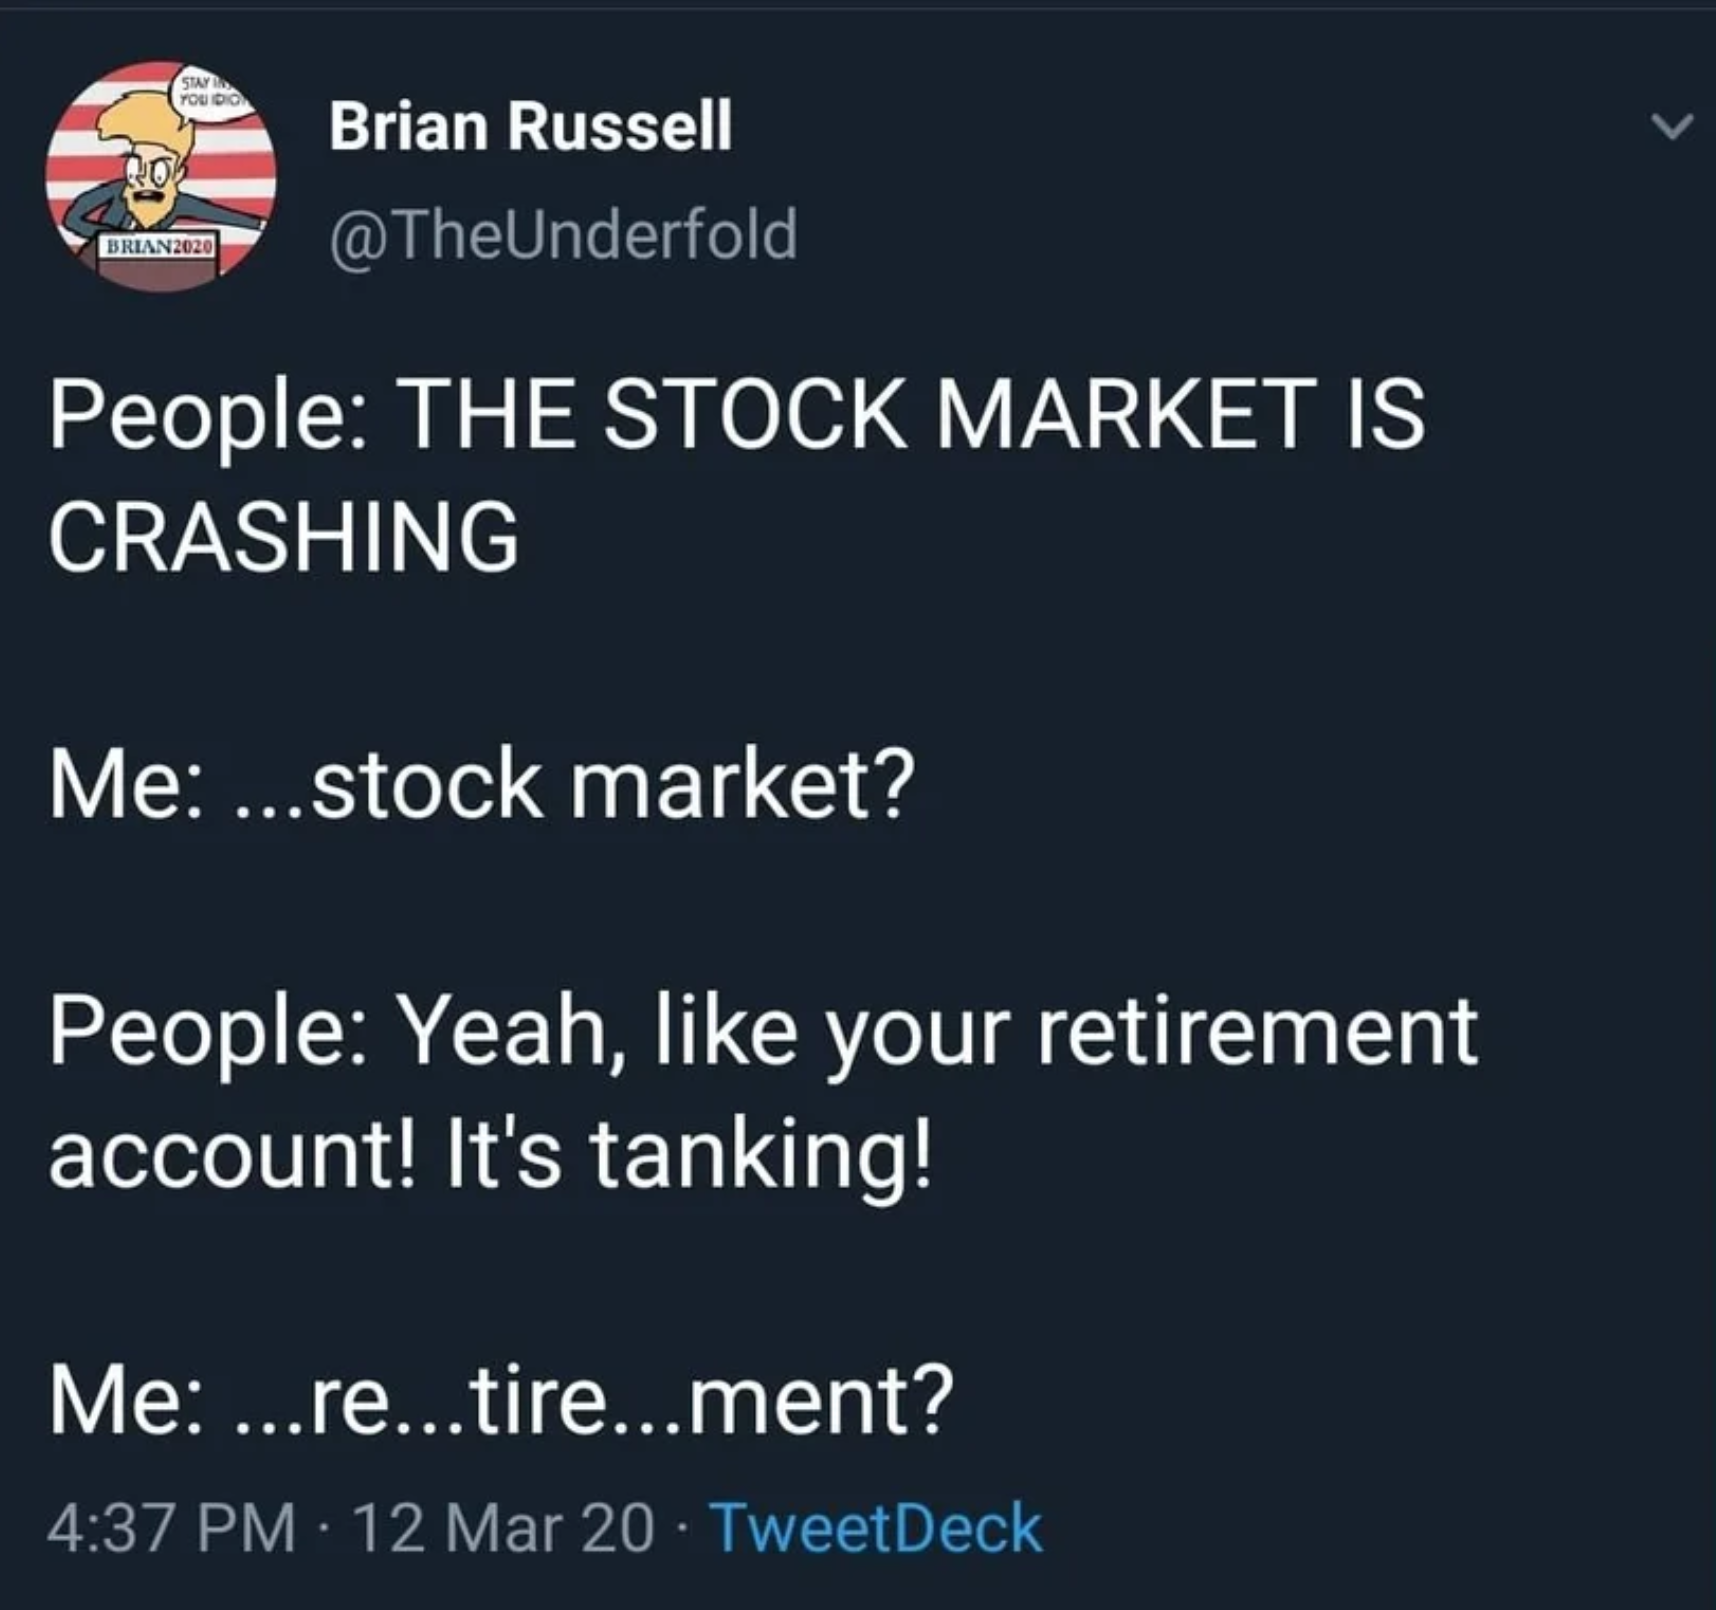 presentation - Brian Russell People The Stock Market Is Crashing Me ...stock market? People Yeah, your retirement account! It's tanking! Me ...re...tire...ment? 12 Mar 20 TweetDeck,